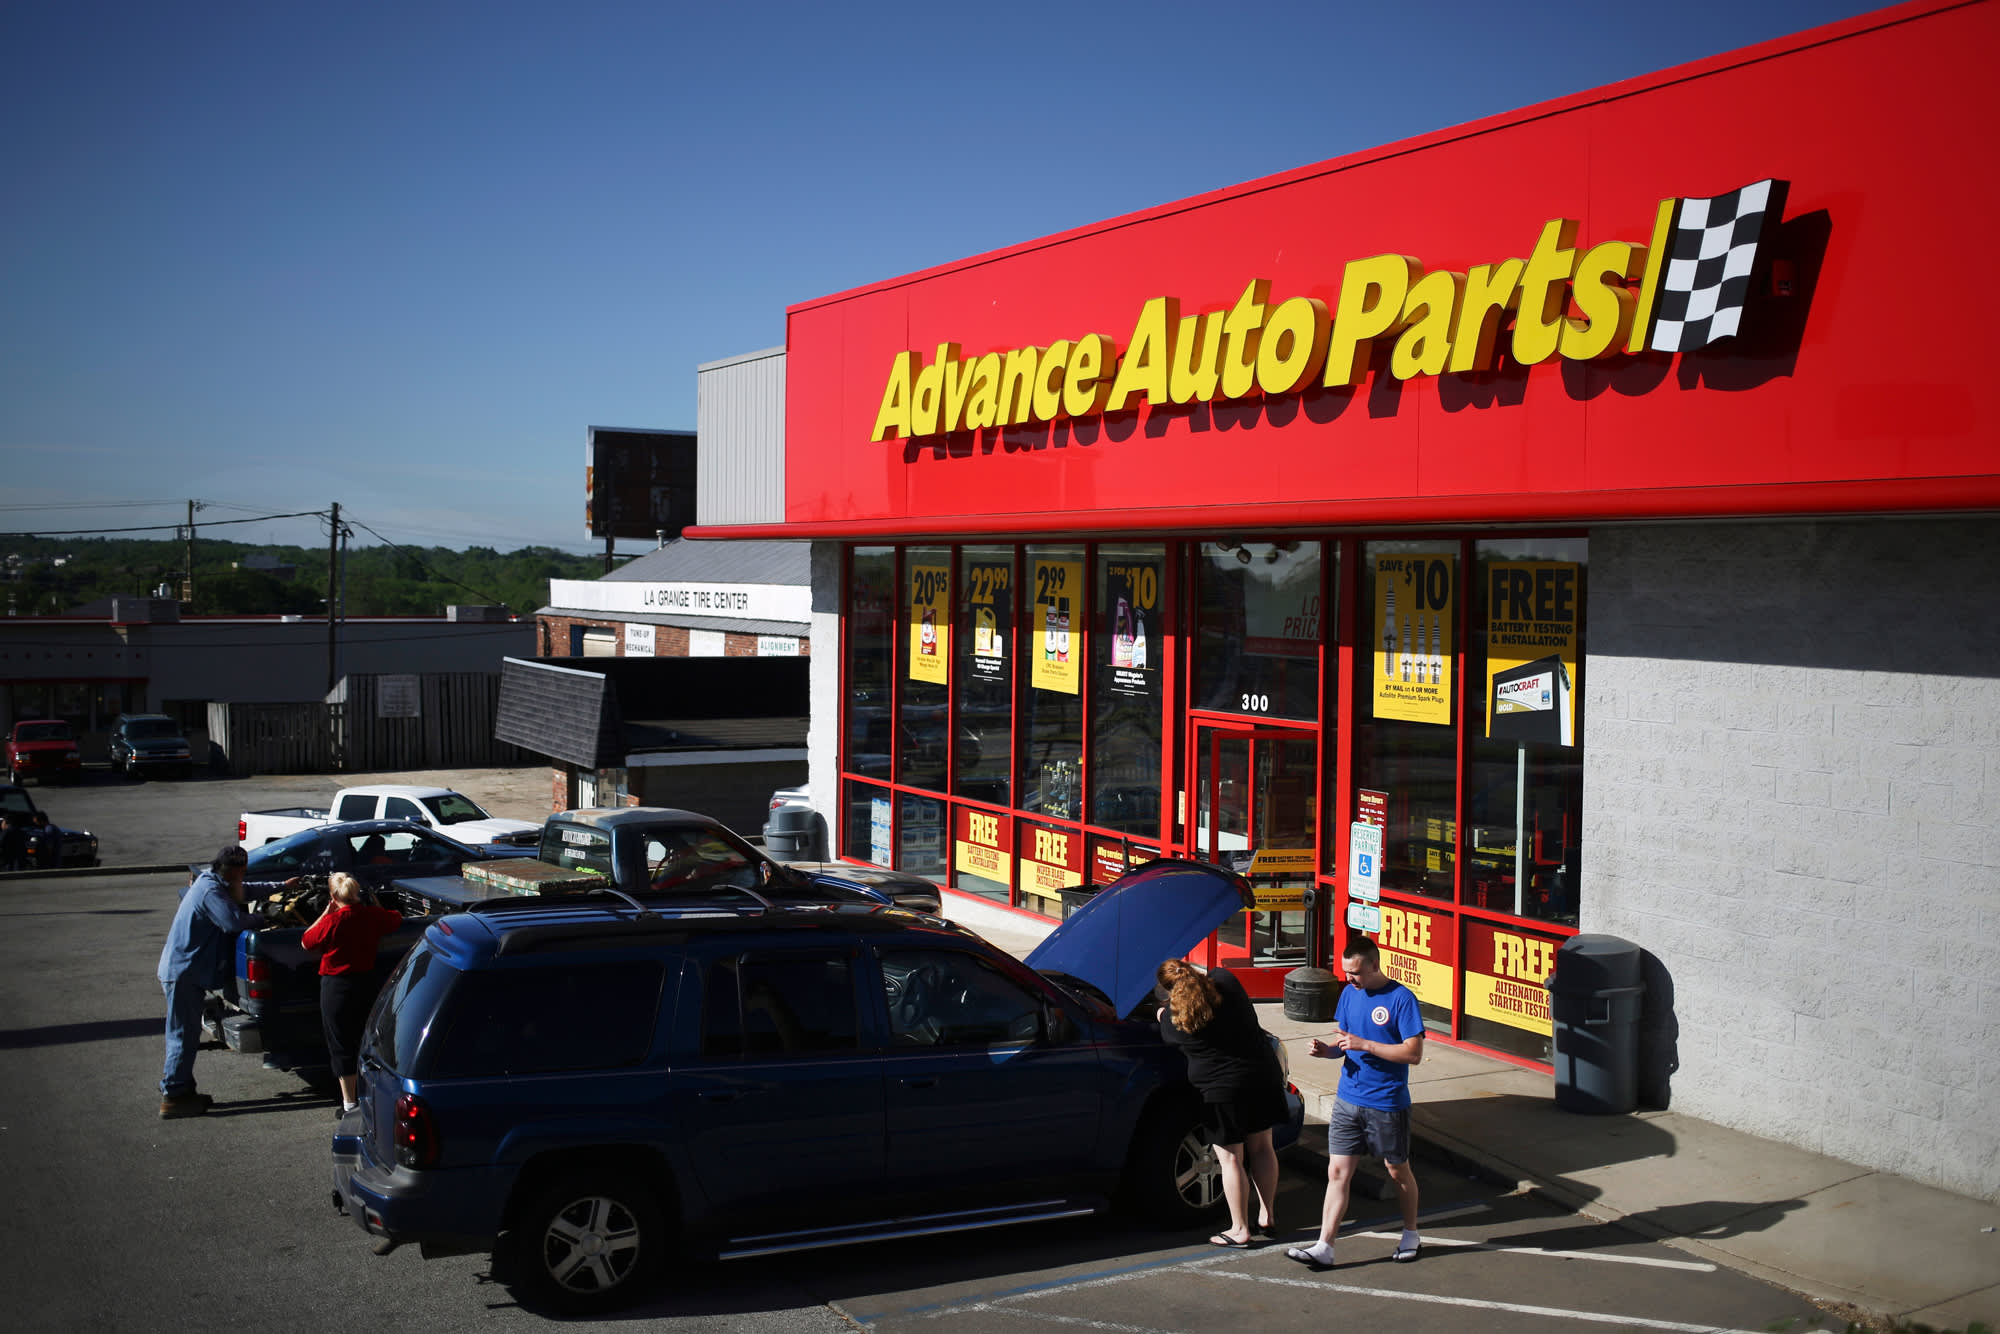 Advance Auto Parts shares fall after dismal Q1